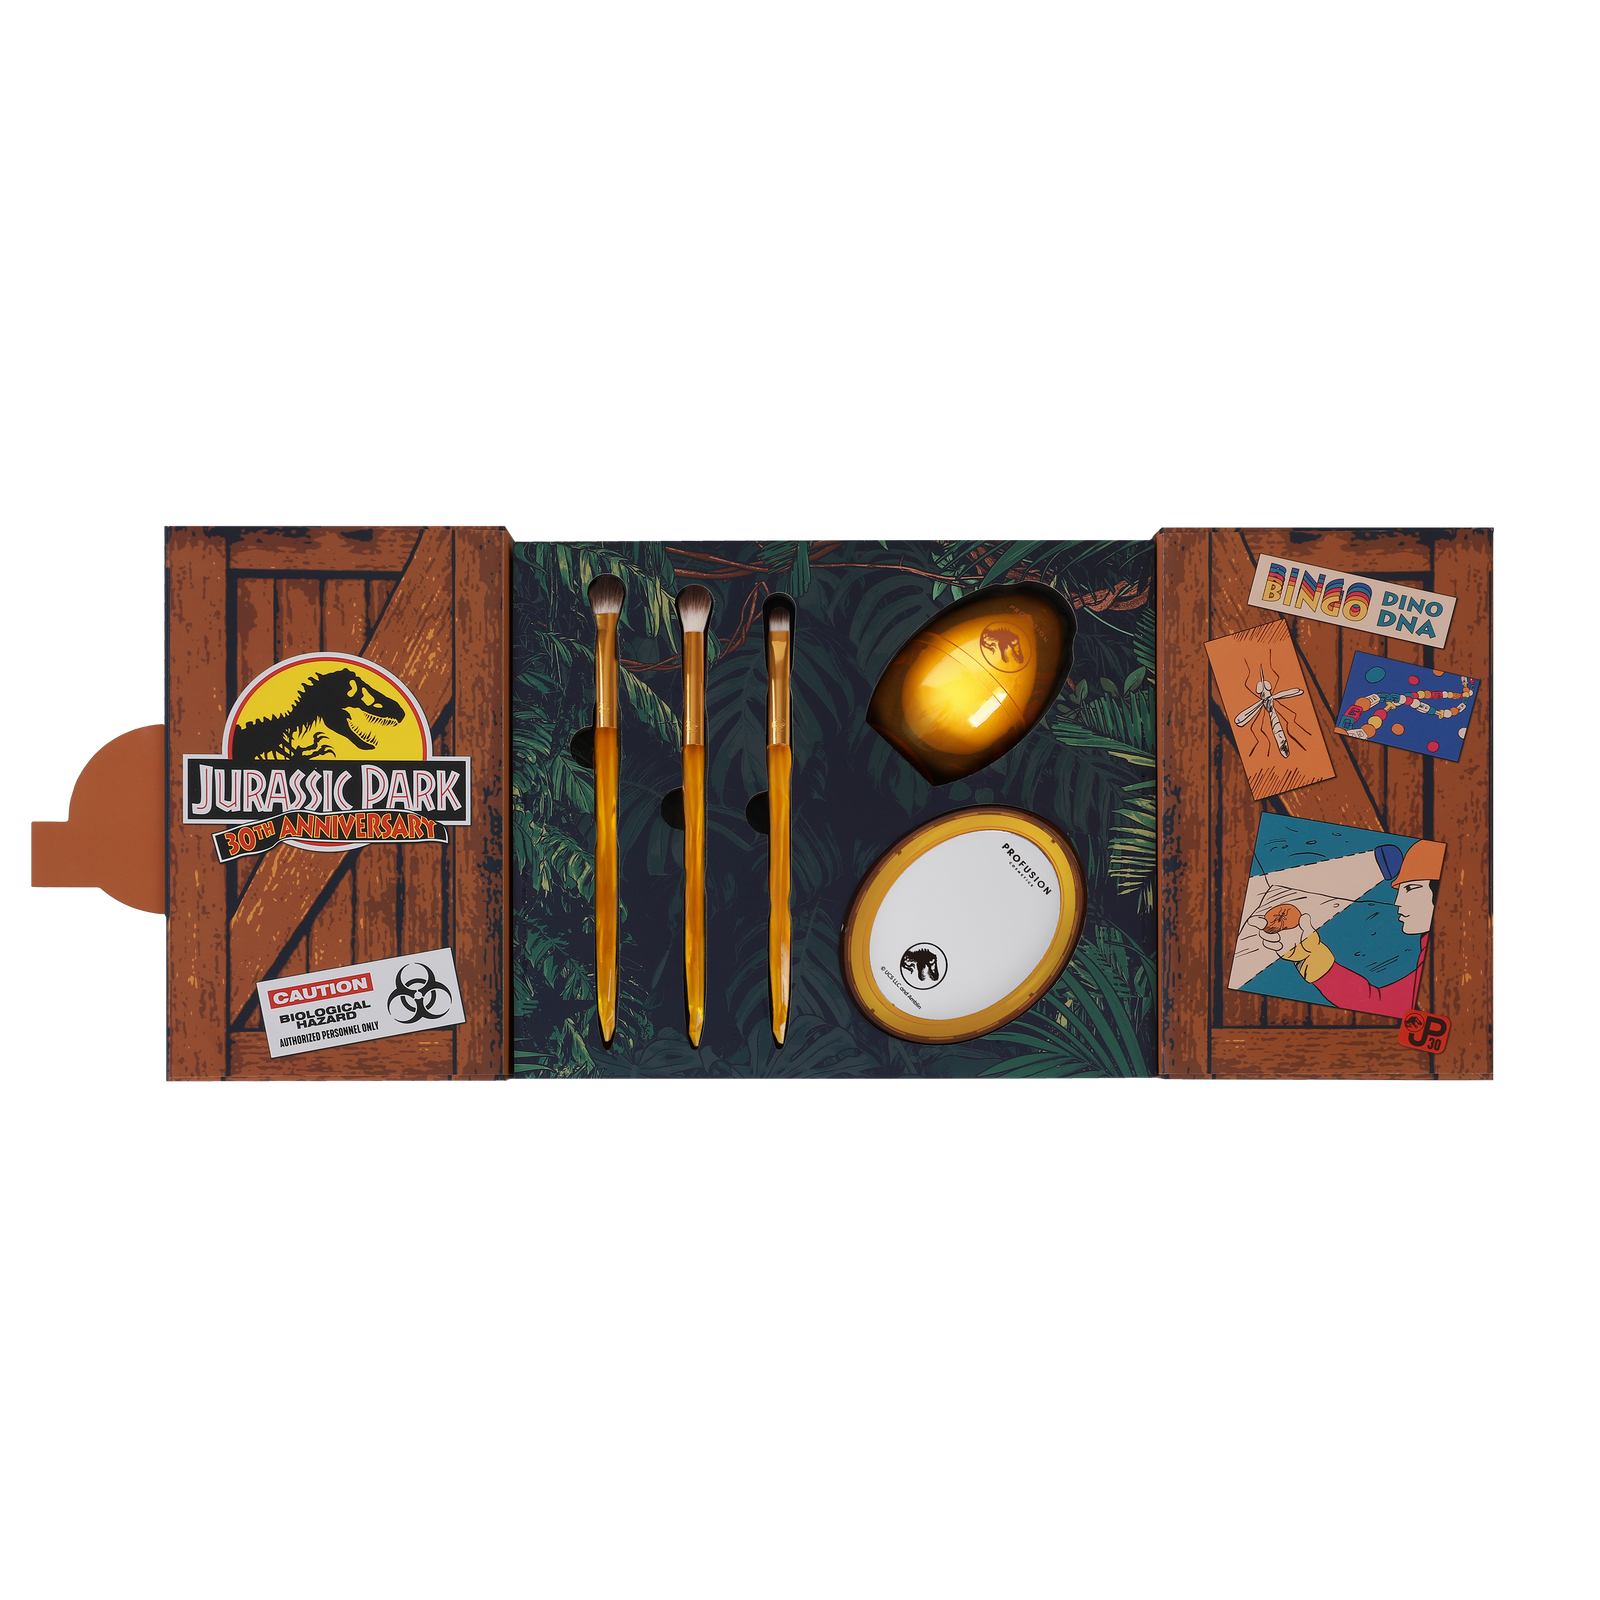 opened brush set with jurassic logo on left and three eyeshadow brushes and beauty blender and mirror in the middle , and on the right side different cartoon pictures one of a mosquito, a miner finding a mosquito in amber the words '' Bingo, Dino, DNA"